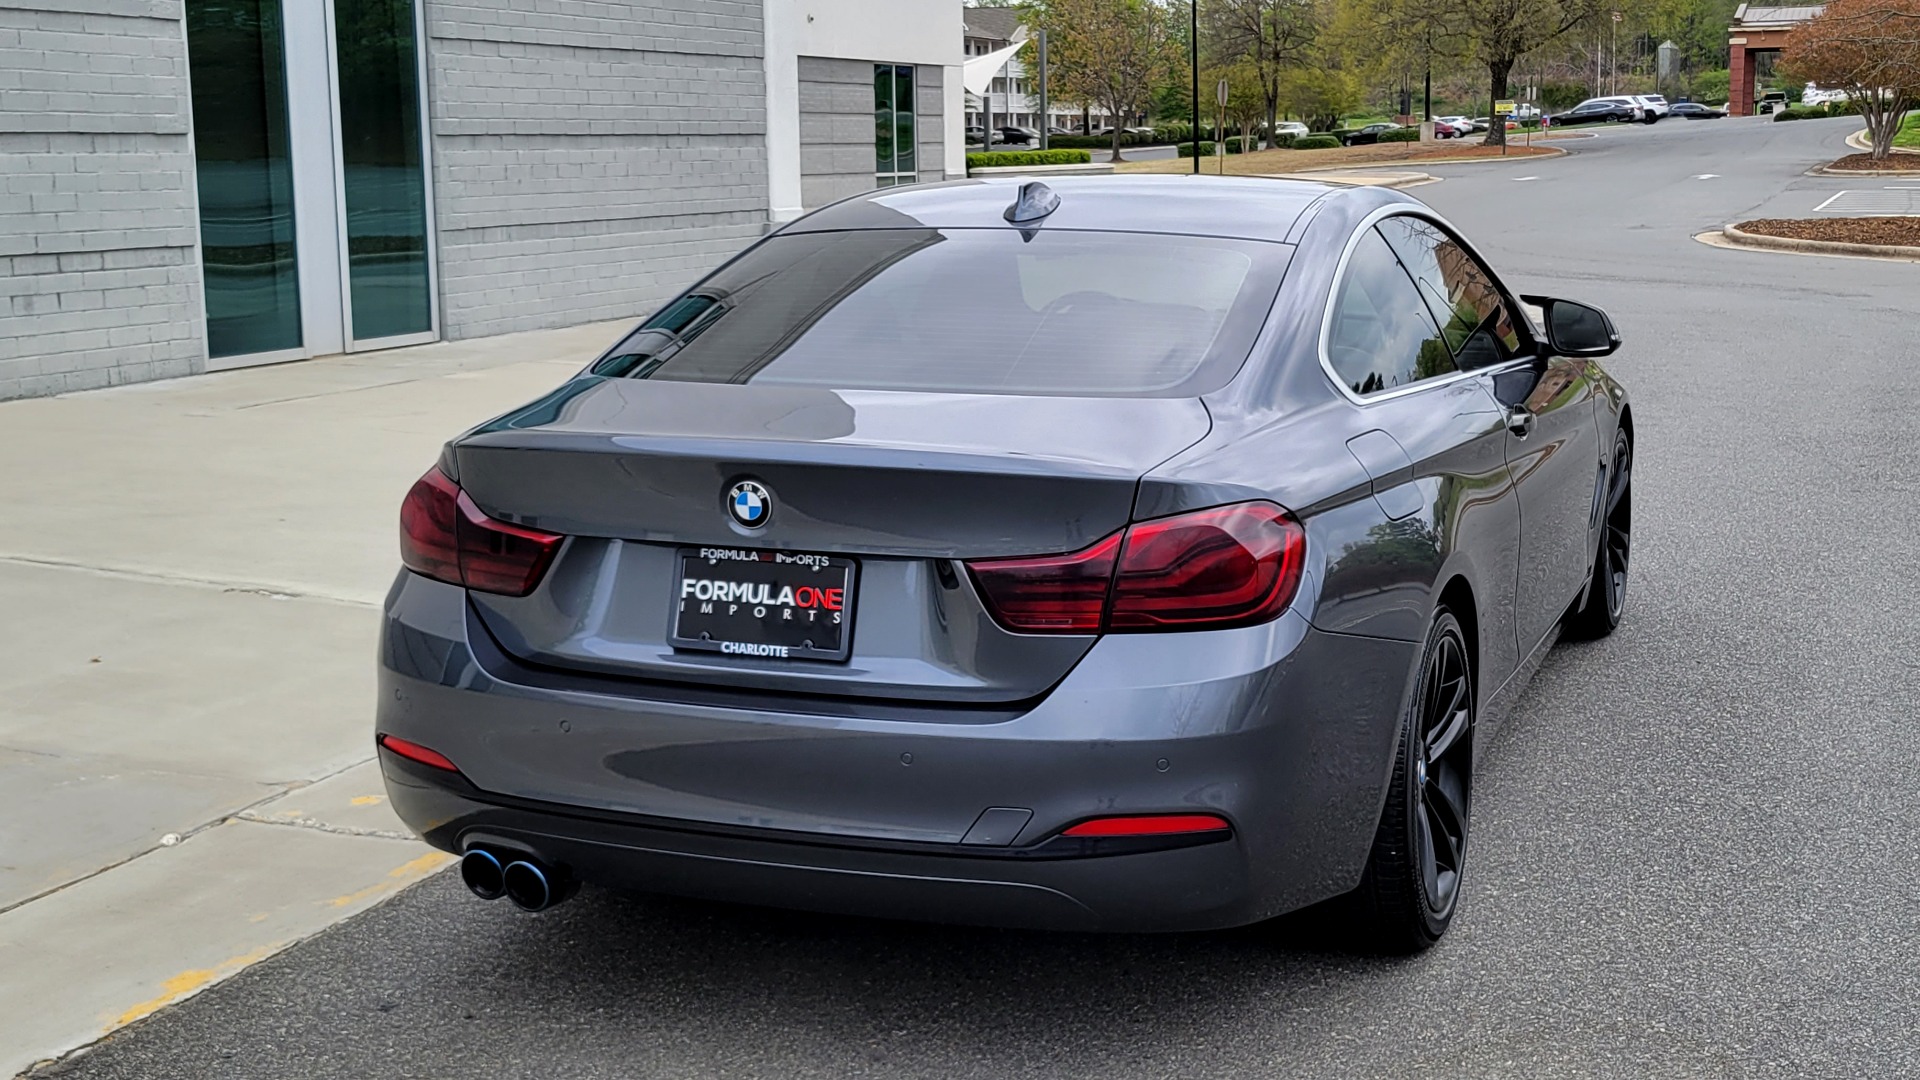 Used 2019 BMW 4 SERIES 430I COUPE 2.0L / RWD / DRVR ASST / CONV PKG / SUNROOF / REARVIEW for sale $31,295 at Formula Imports in Charlotte NC 28227 14